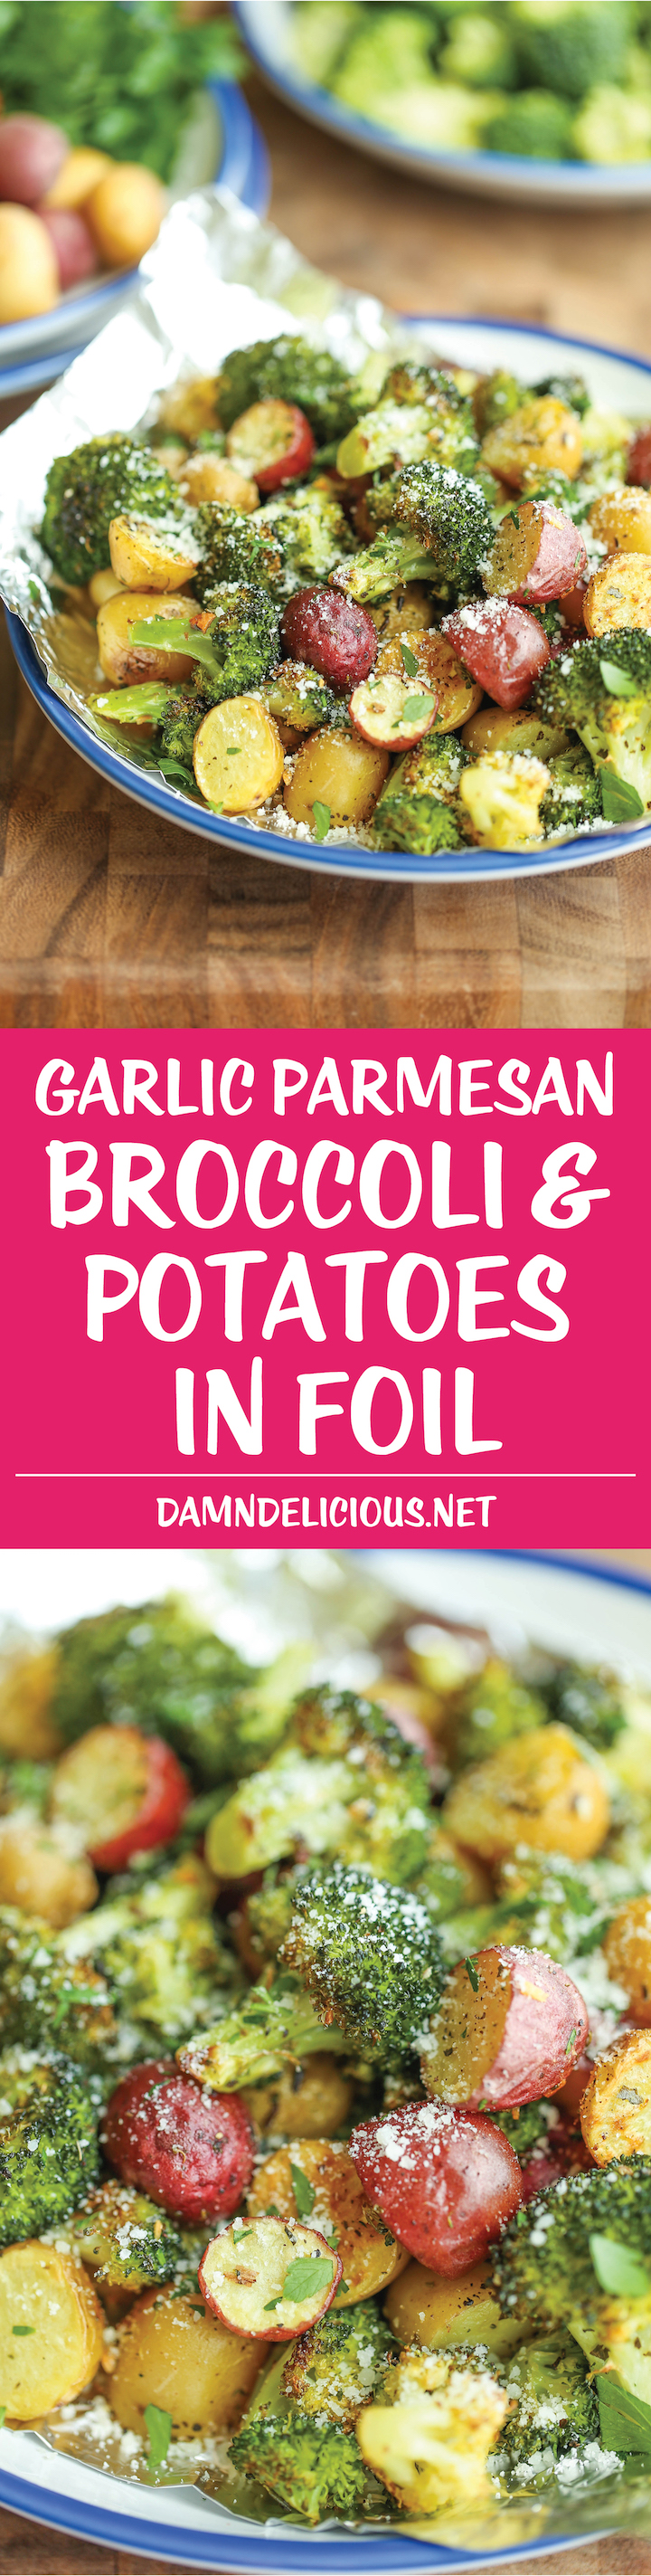 Garlic Parmesan Broccoli and Potatoes in Foil - The easiest, flavor-packed side dish EVER! Wrap everything in foil, toss in your seasonings and you're set!